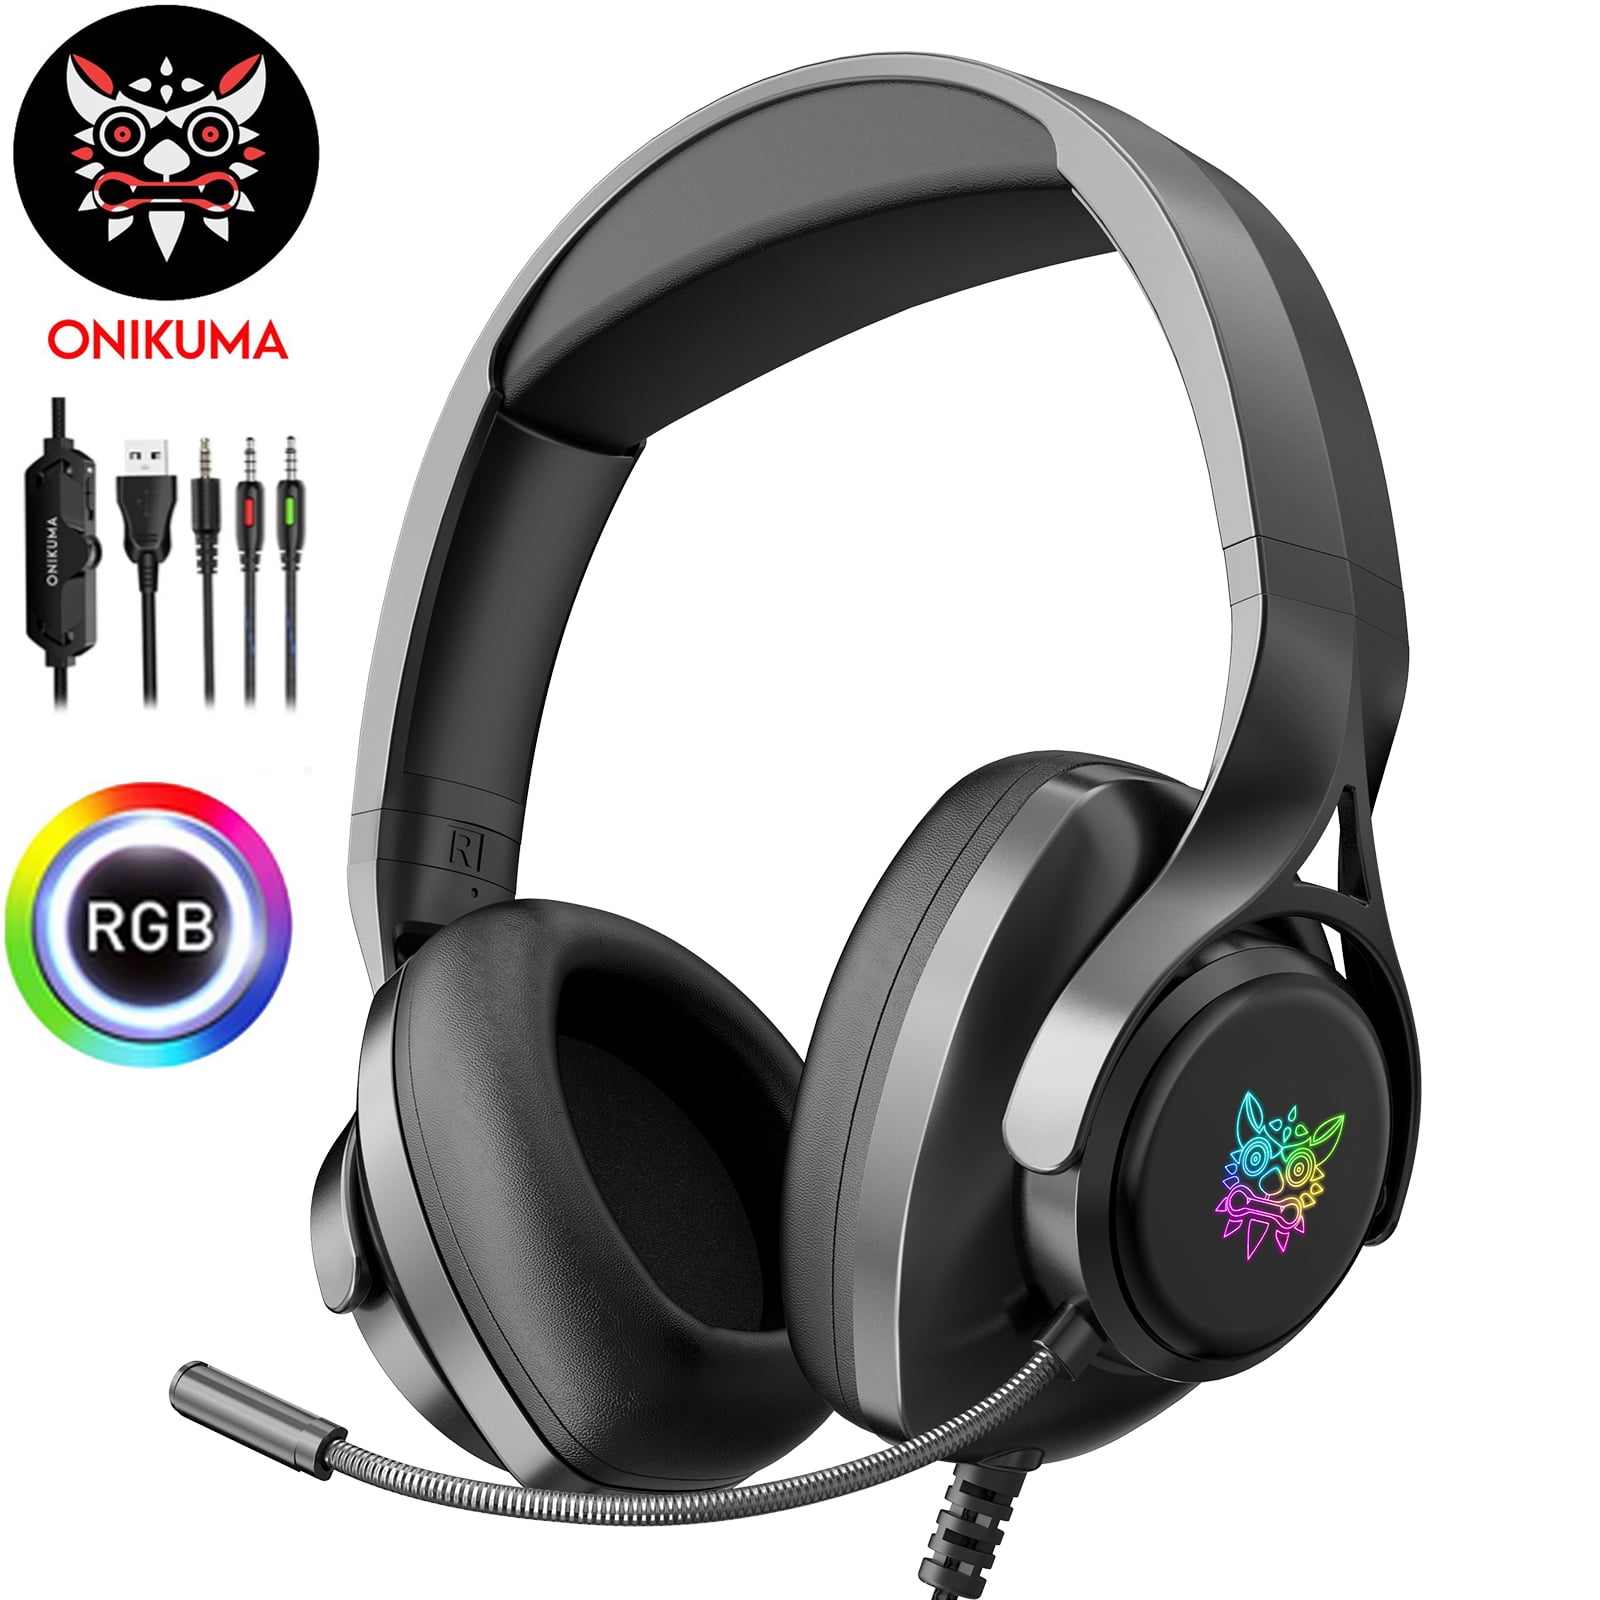 Haiku hensigt udpege Gaming Headset, ONIKUMA X16 Stereo Bass Surround RGB Noise Cancelling Over  Ear Gaming Headphones with Mic, for PS4 Xbox One PC Nintendo Switch Tablet  Smartphone - Walmart.com